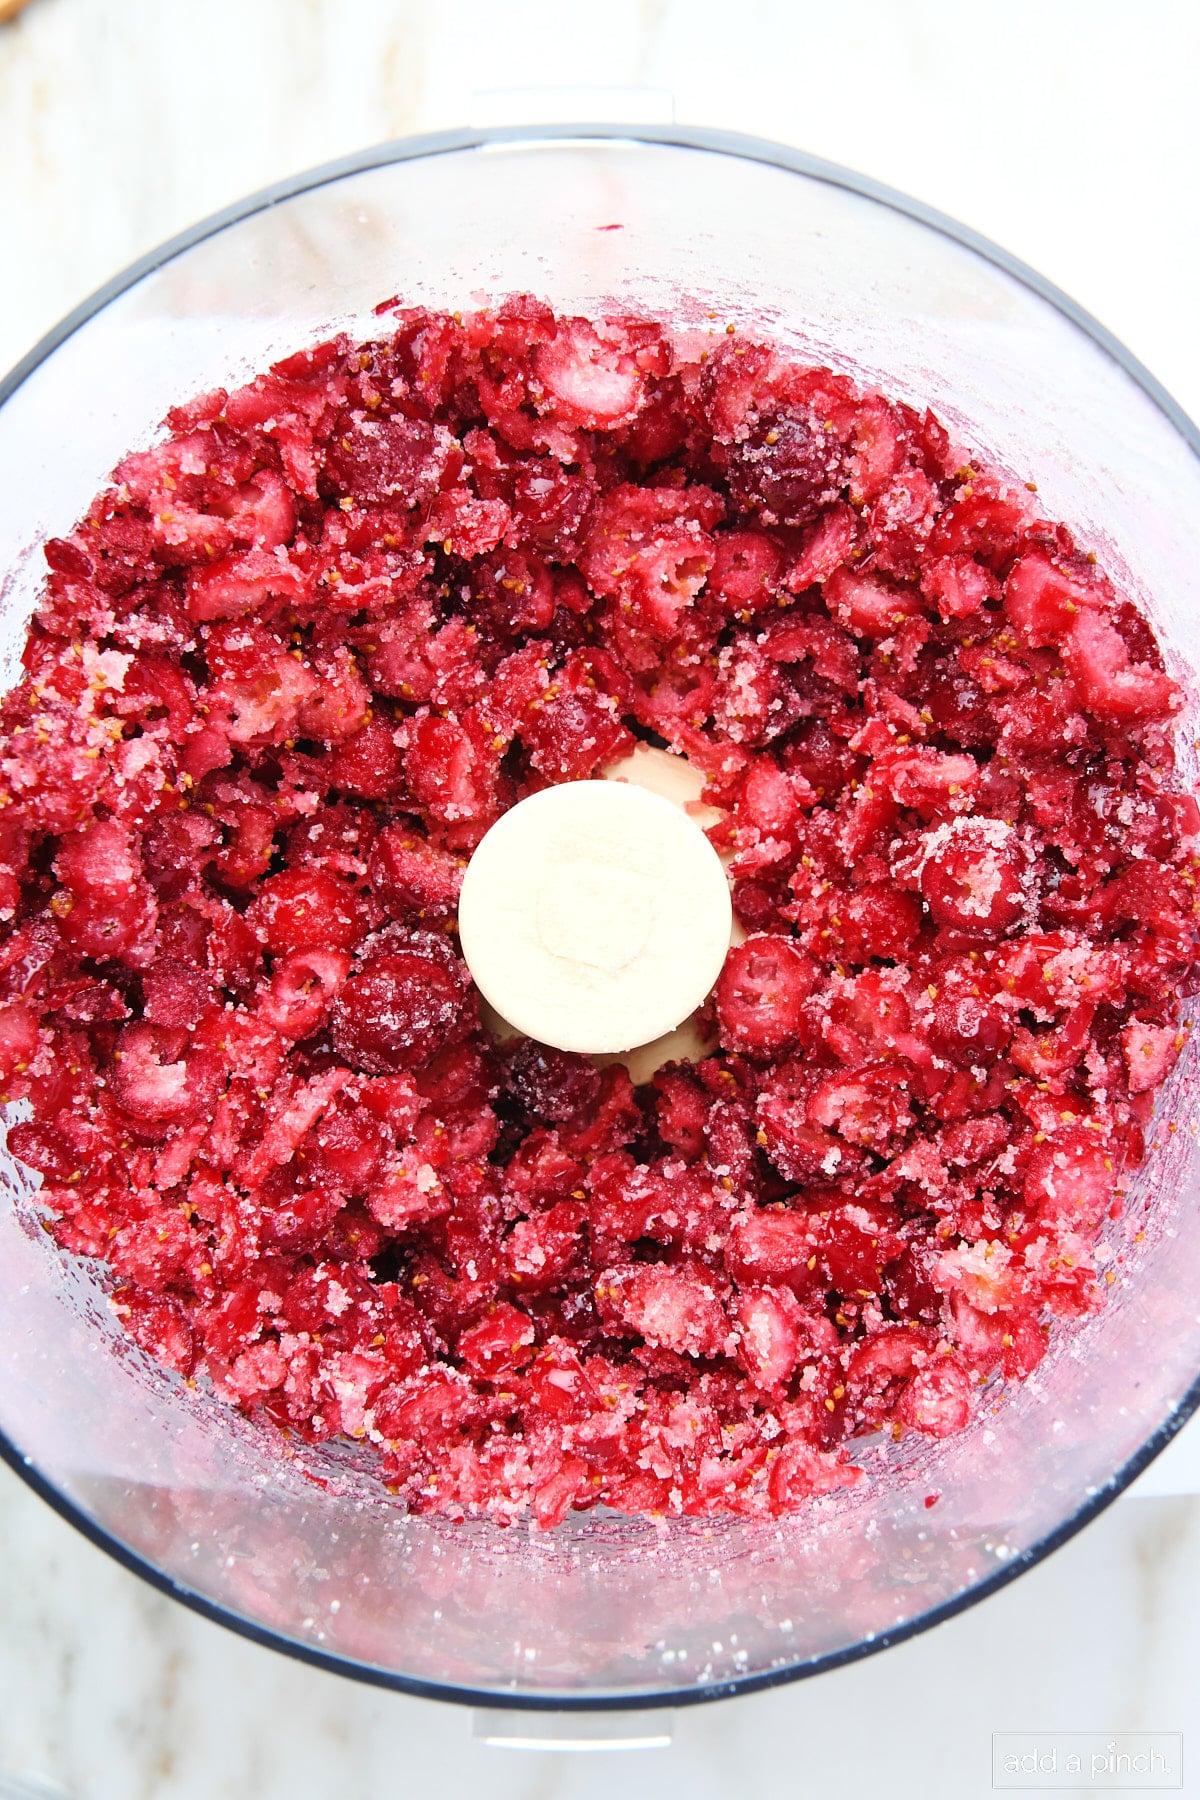 Fresh cranberries and sugar have been coarsely pulsed to combine in the food processor.